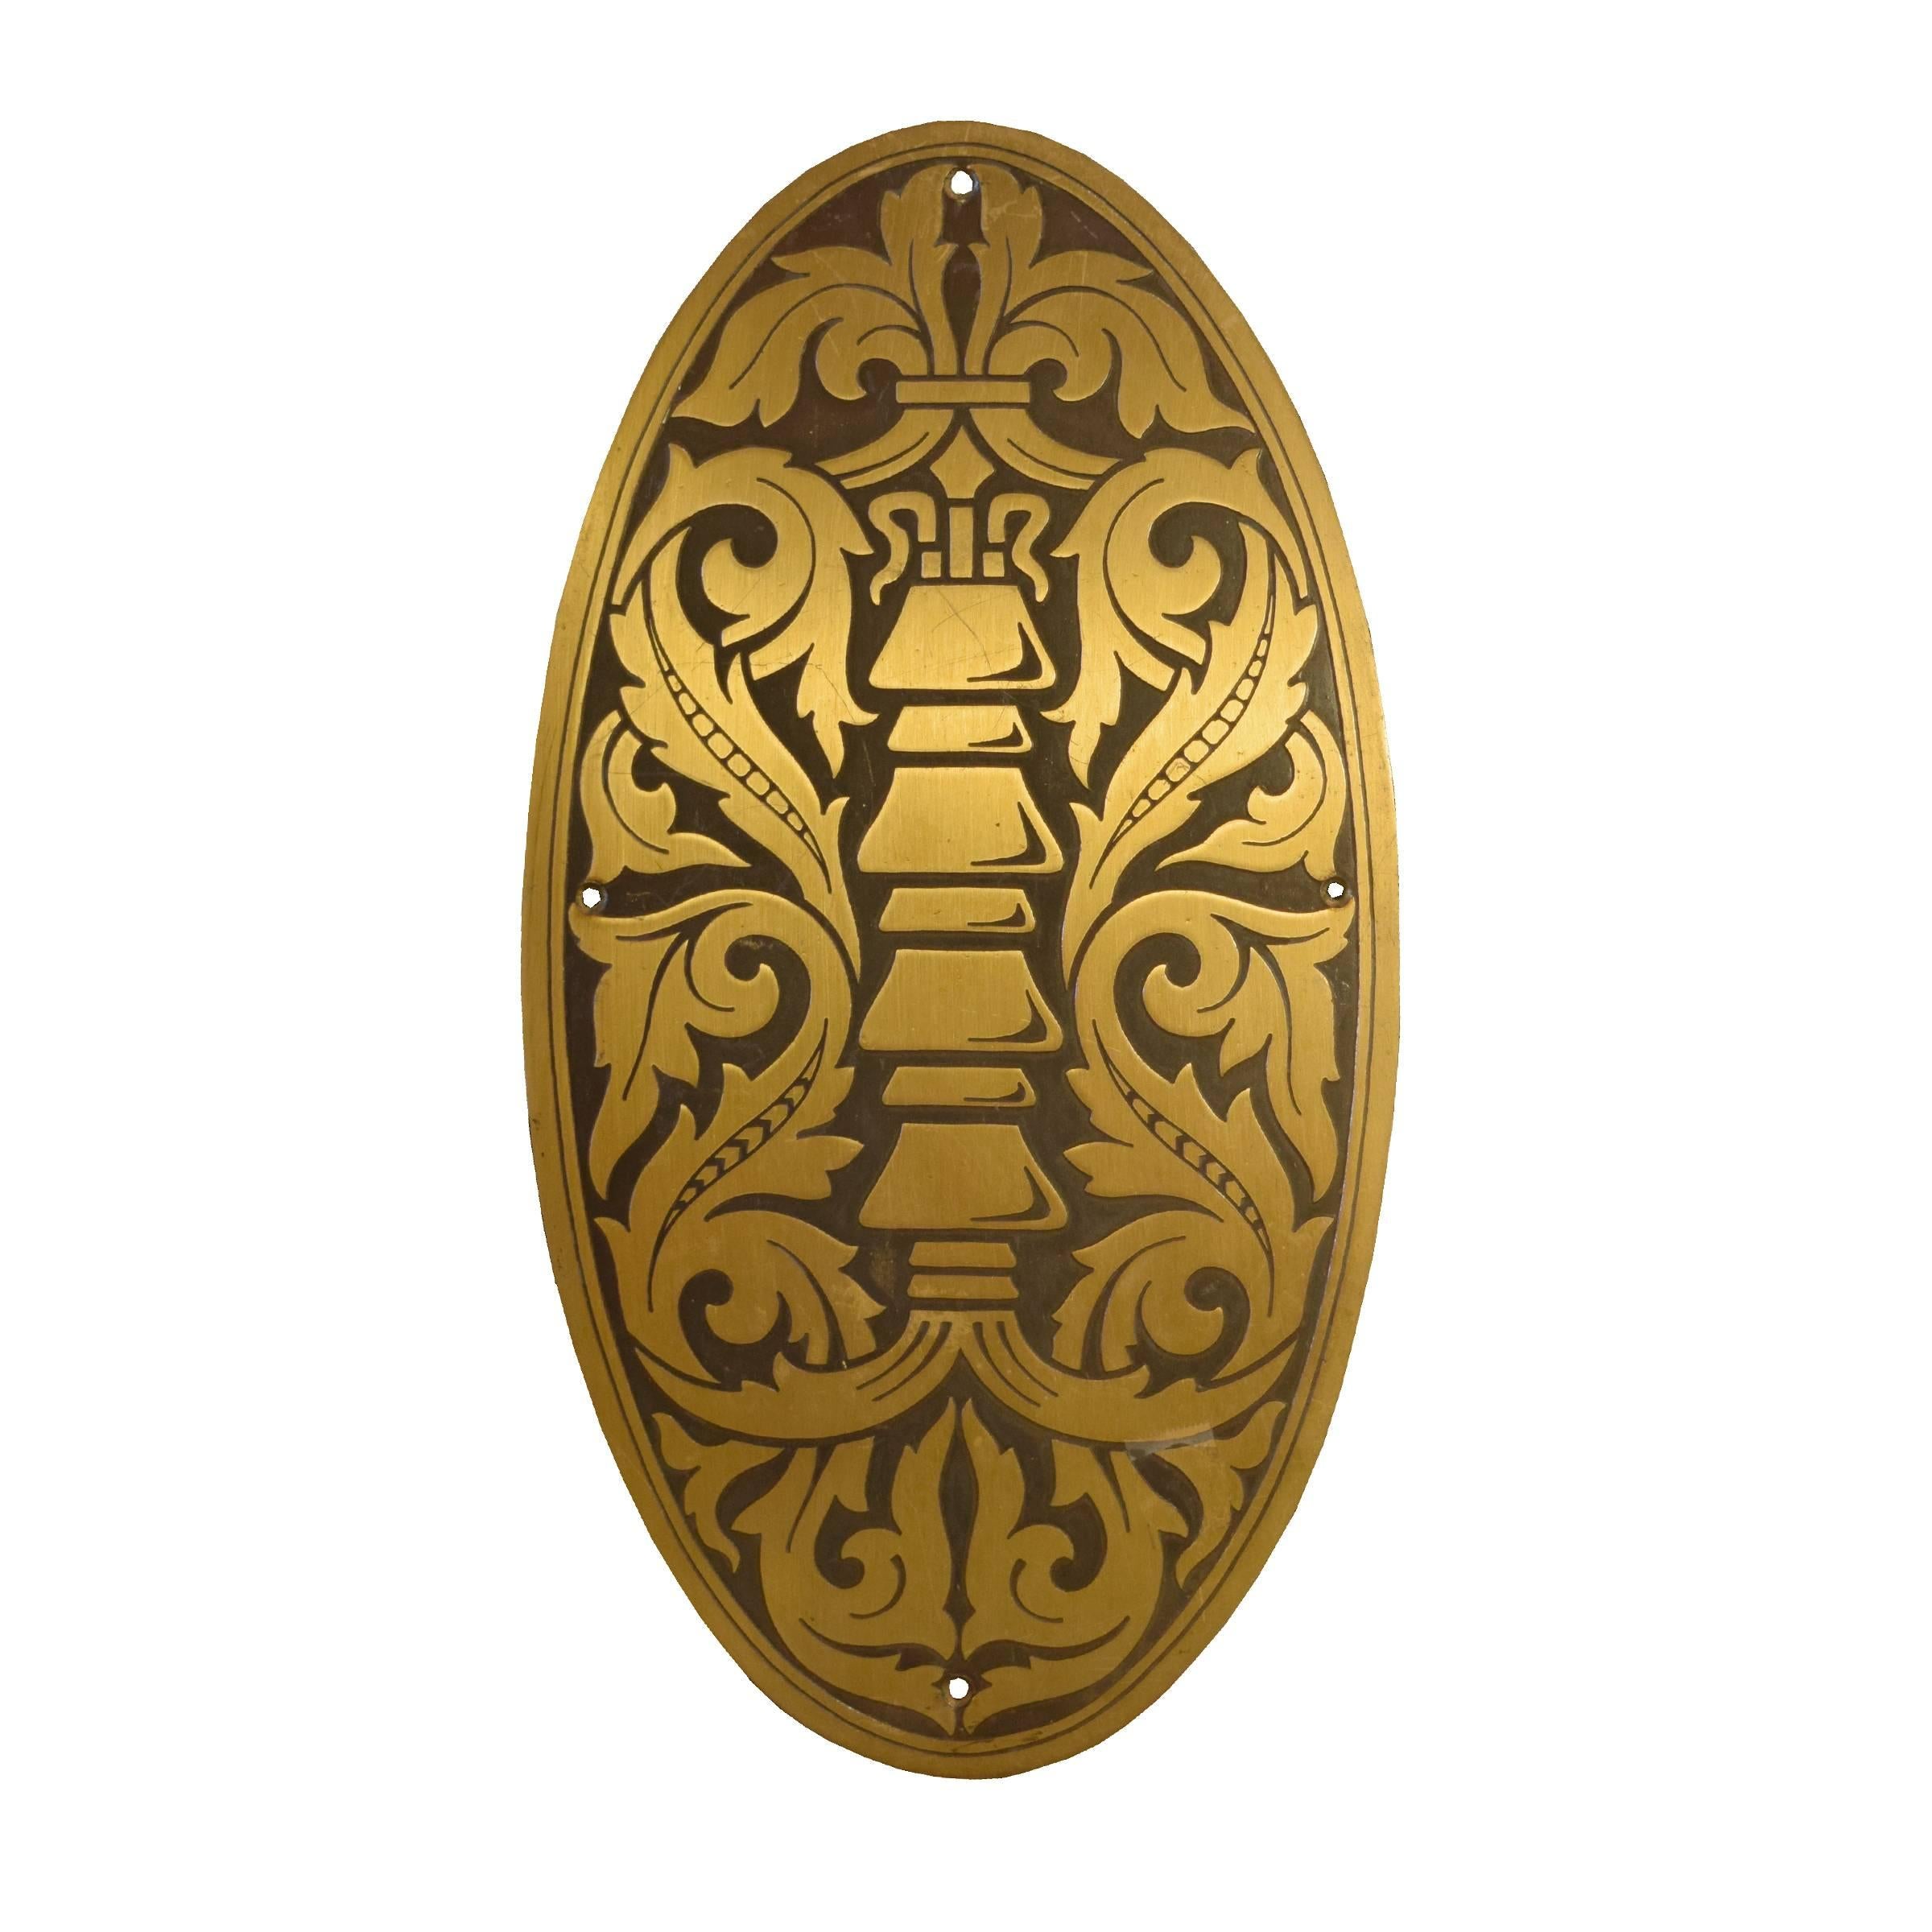 Pair of American decorative brass elevator door plates with an acanthus leaf motif, circa 1920.